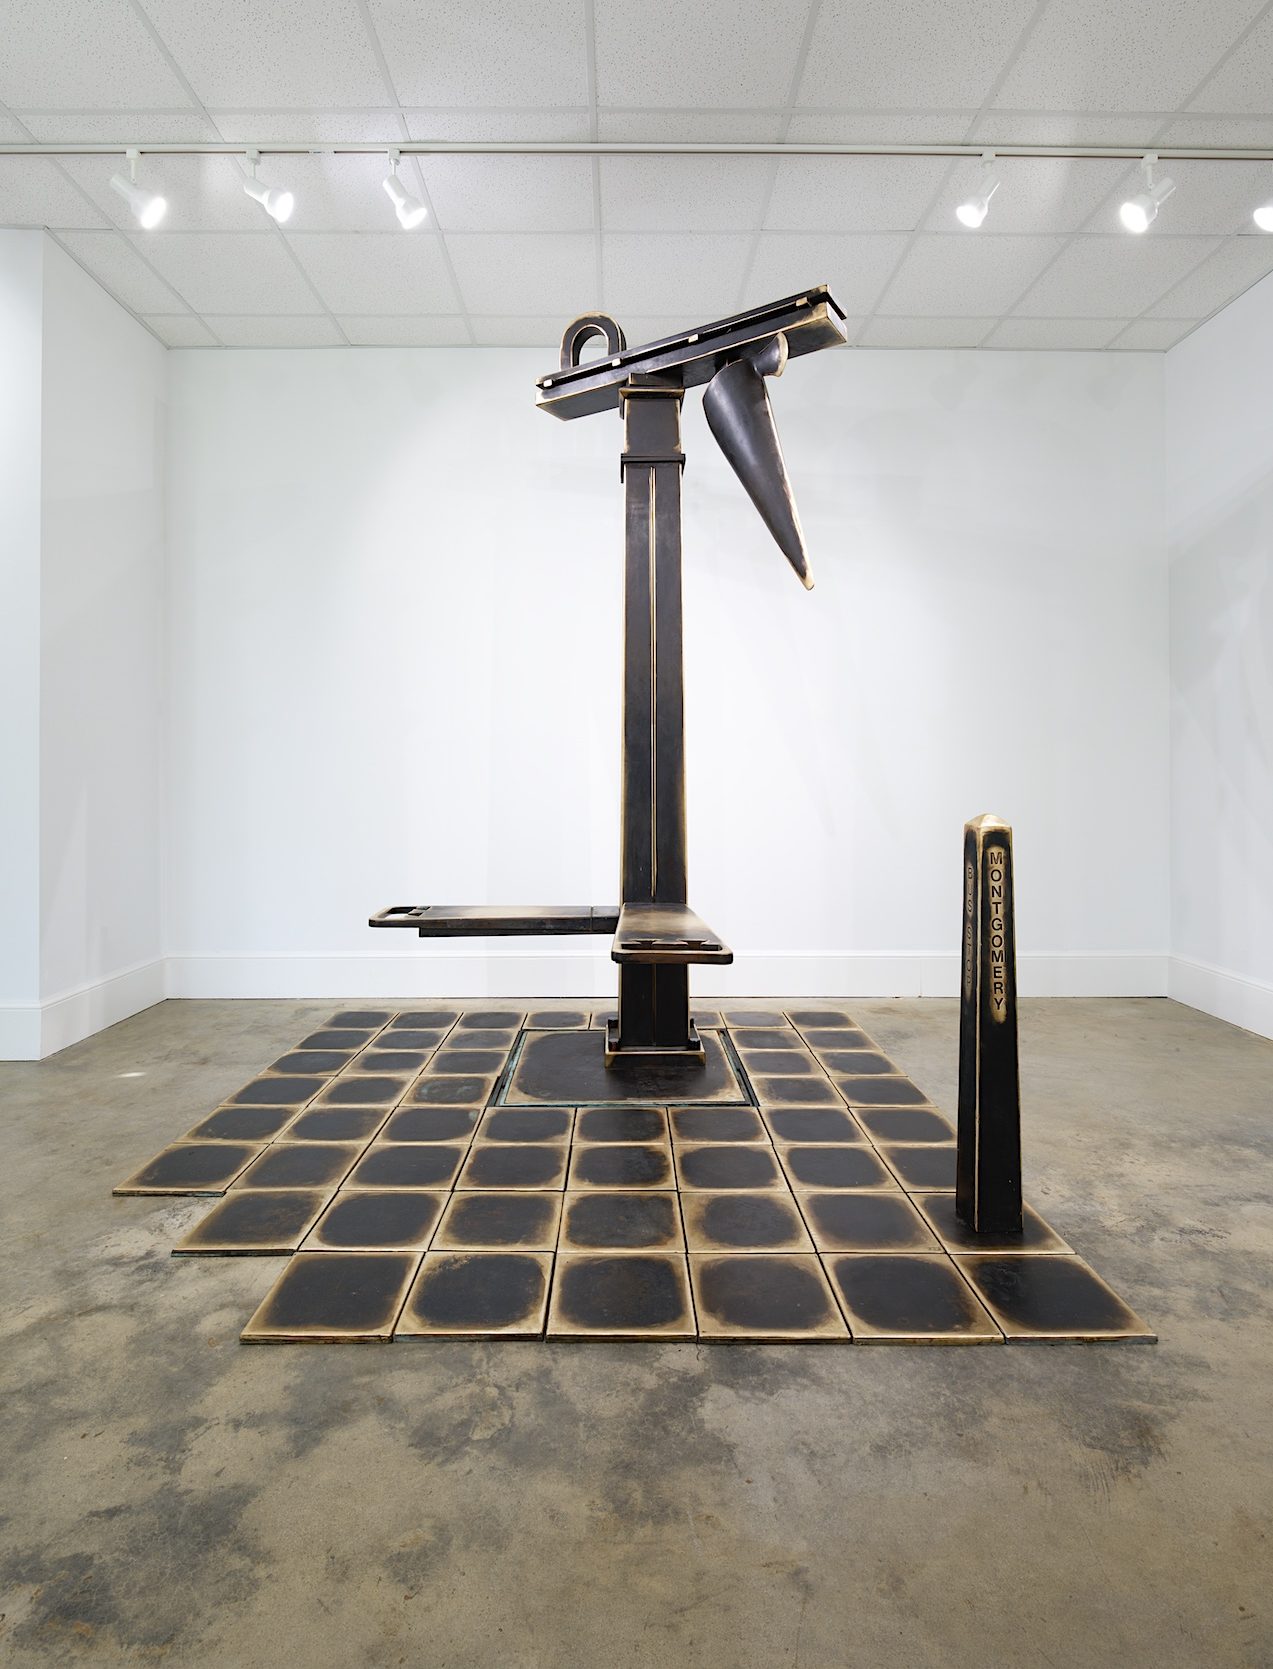 A stark white room is filled with a large bronze sculpture recreating a bus stop.